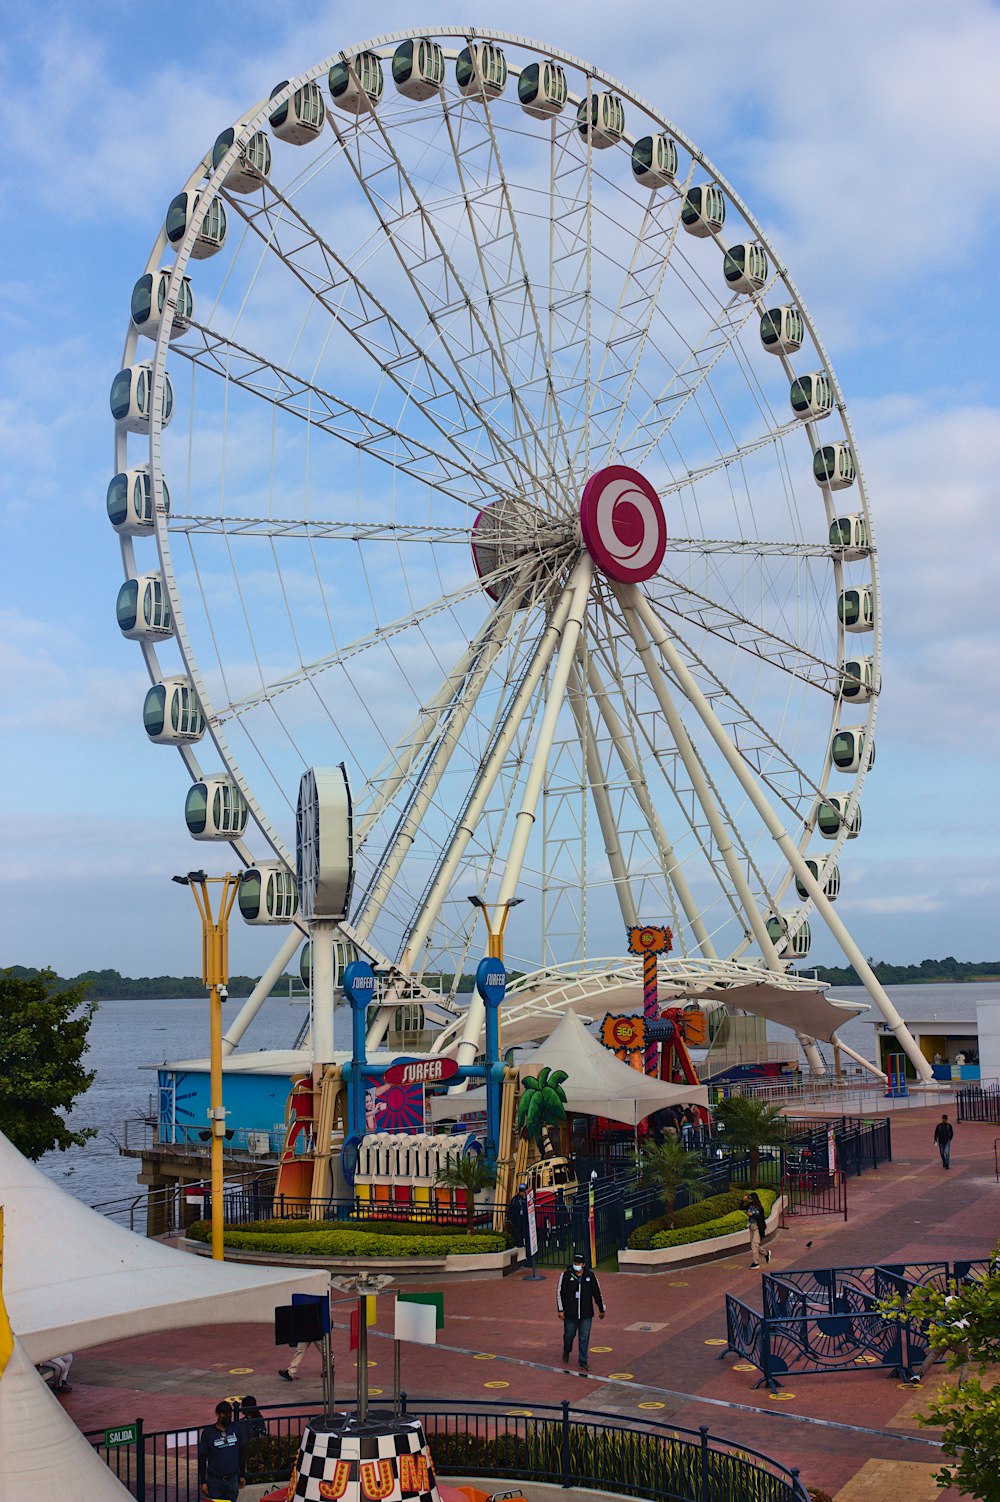 a ferris wheel with people walking around